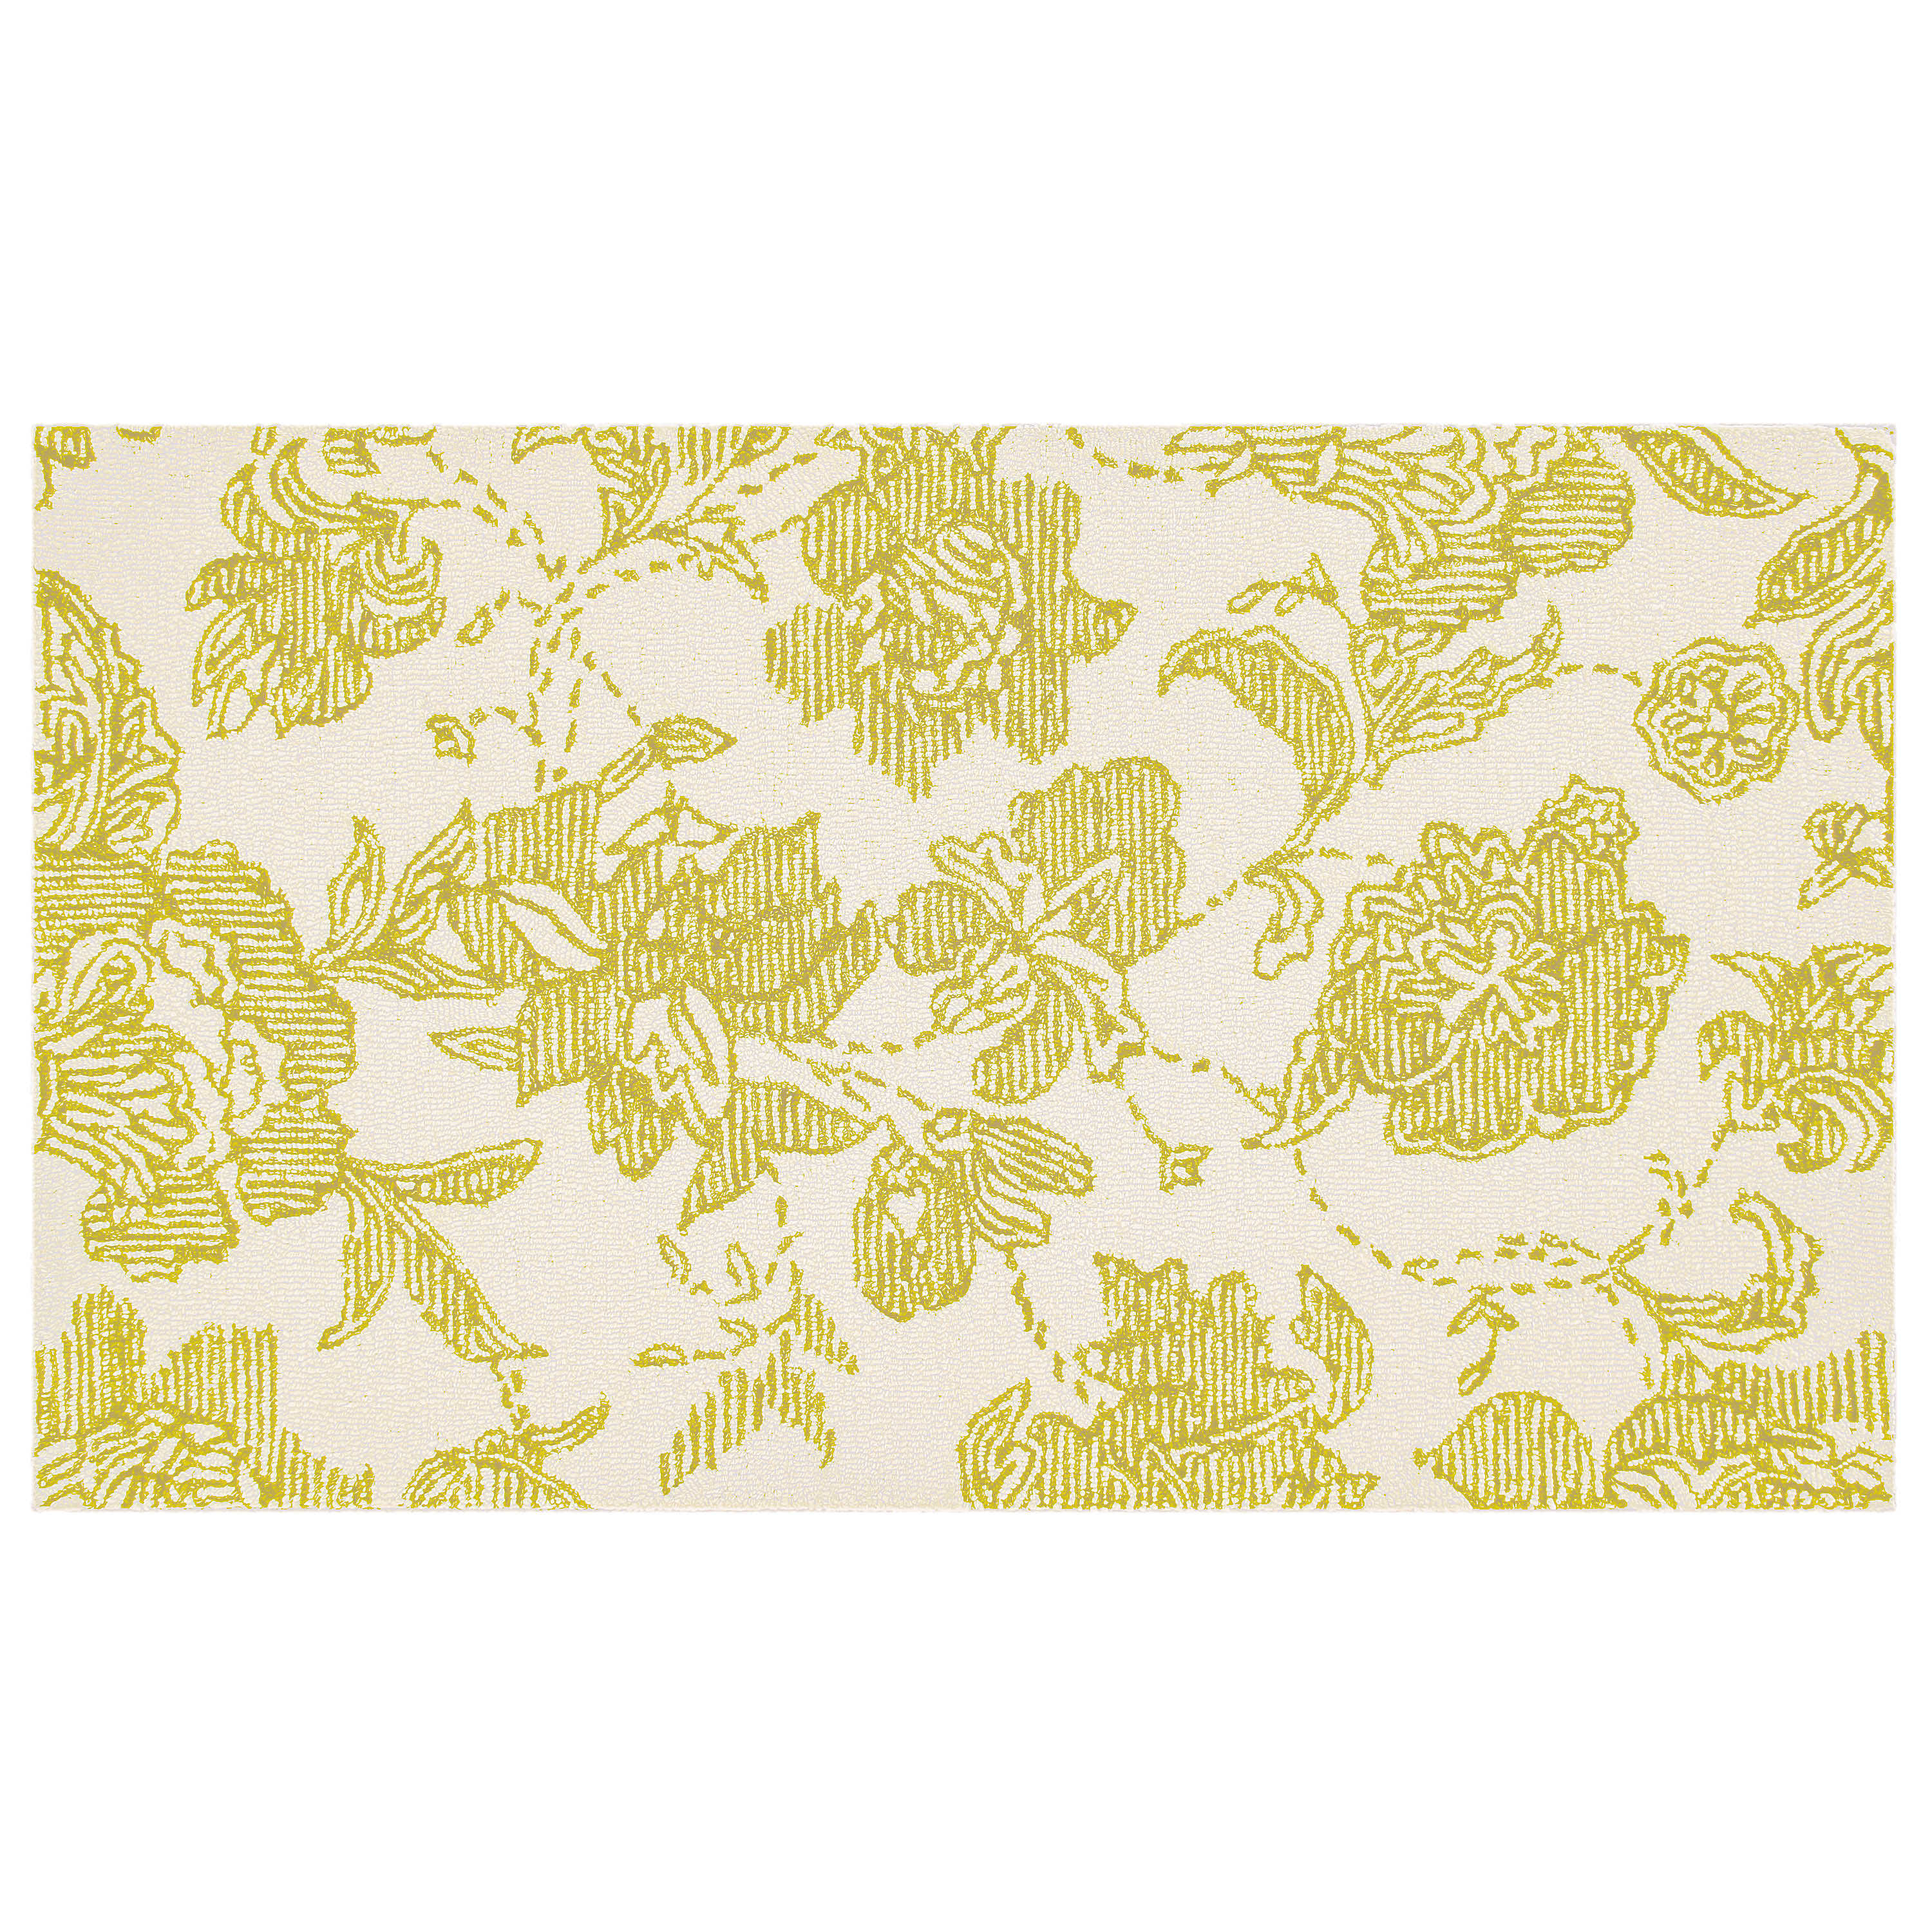 Marquee Floral Rug - Chartreuse - 3' x 5' mackenzie-childs Panama 0